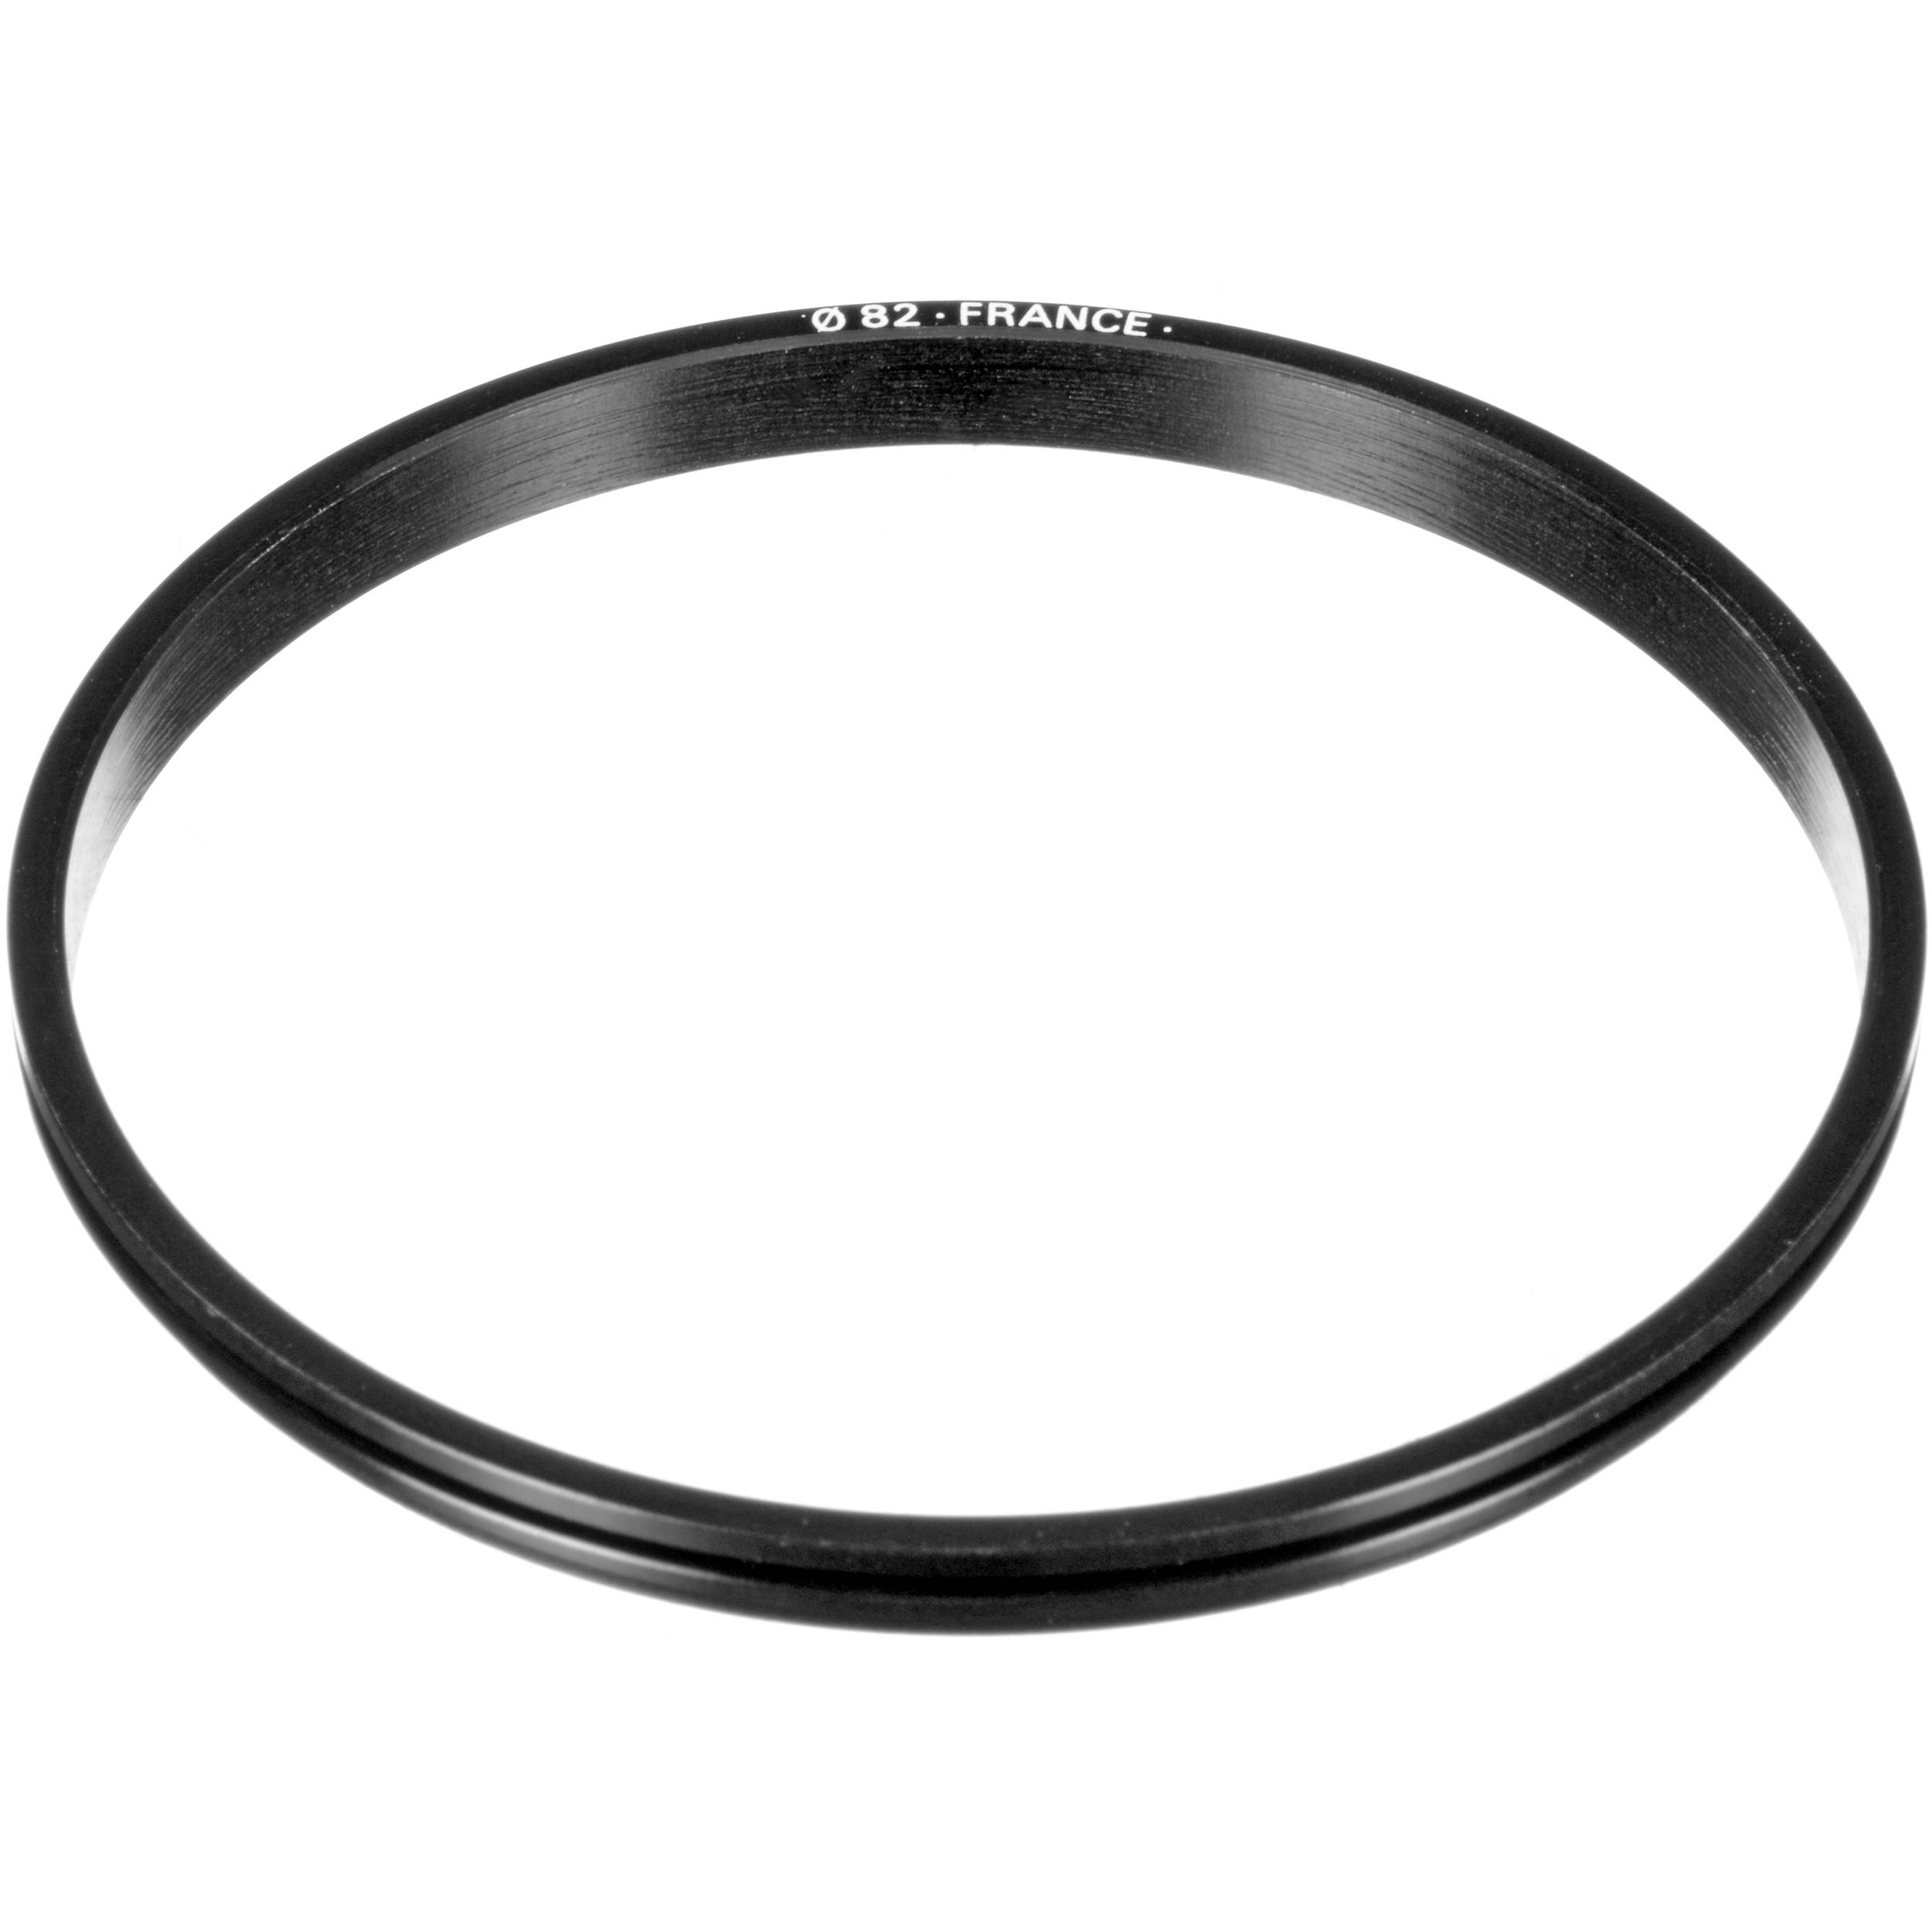 Cokin P Series Filter Holder Adapter Ring 82mm Cp482 B H Photo Cokin a series 36mm adaptor ring a436 filter holder ring. cokin p series filter holder adapter ring 82mm